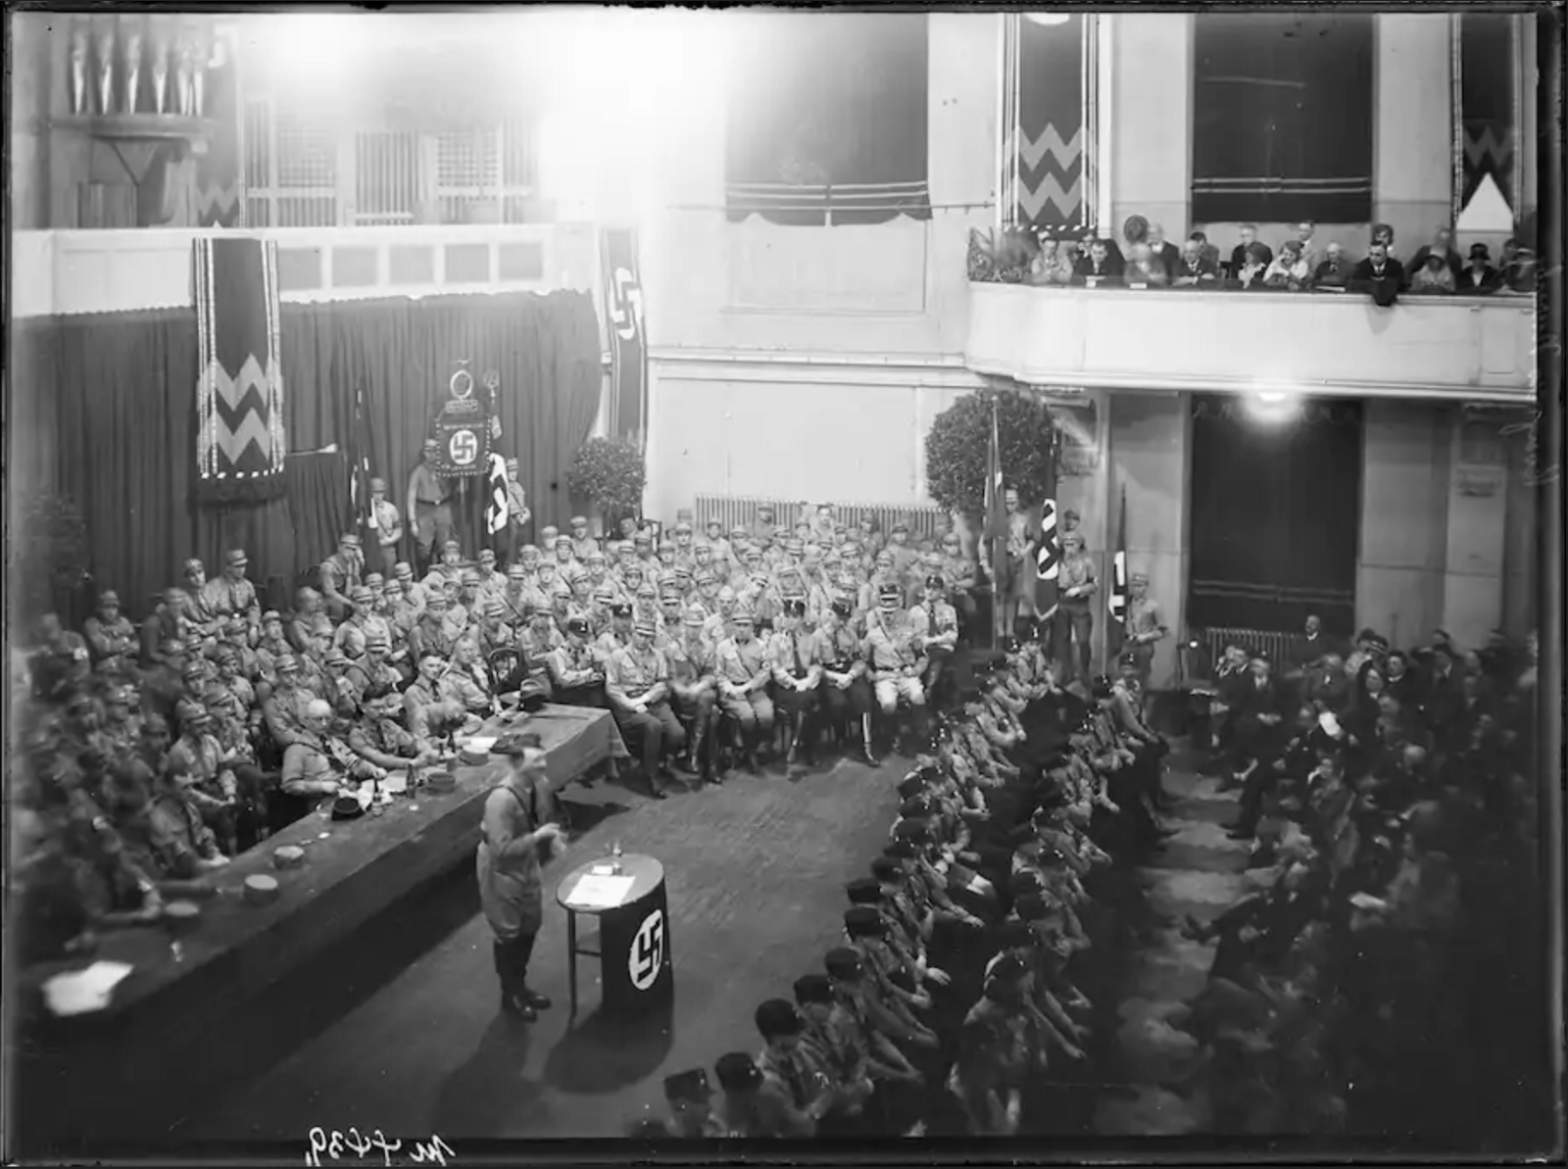 Hitler speaking at a rally. (National Archives and Records Administration)